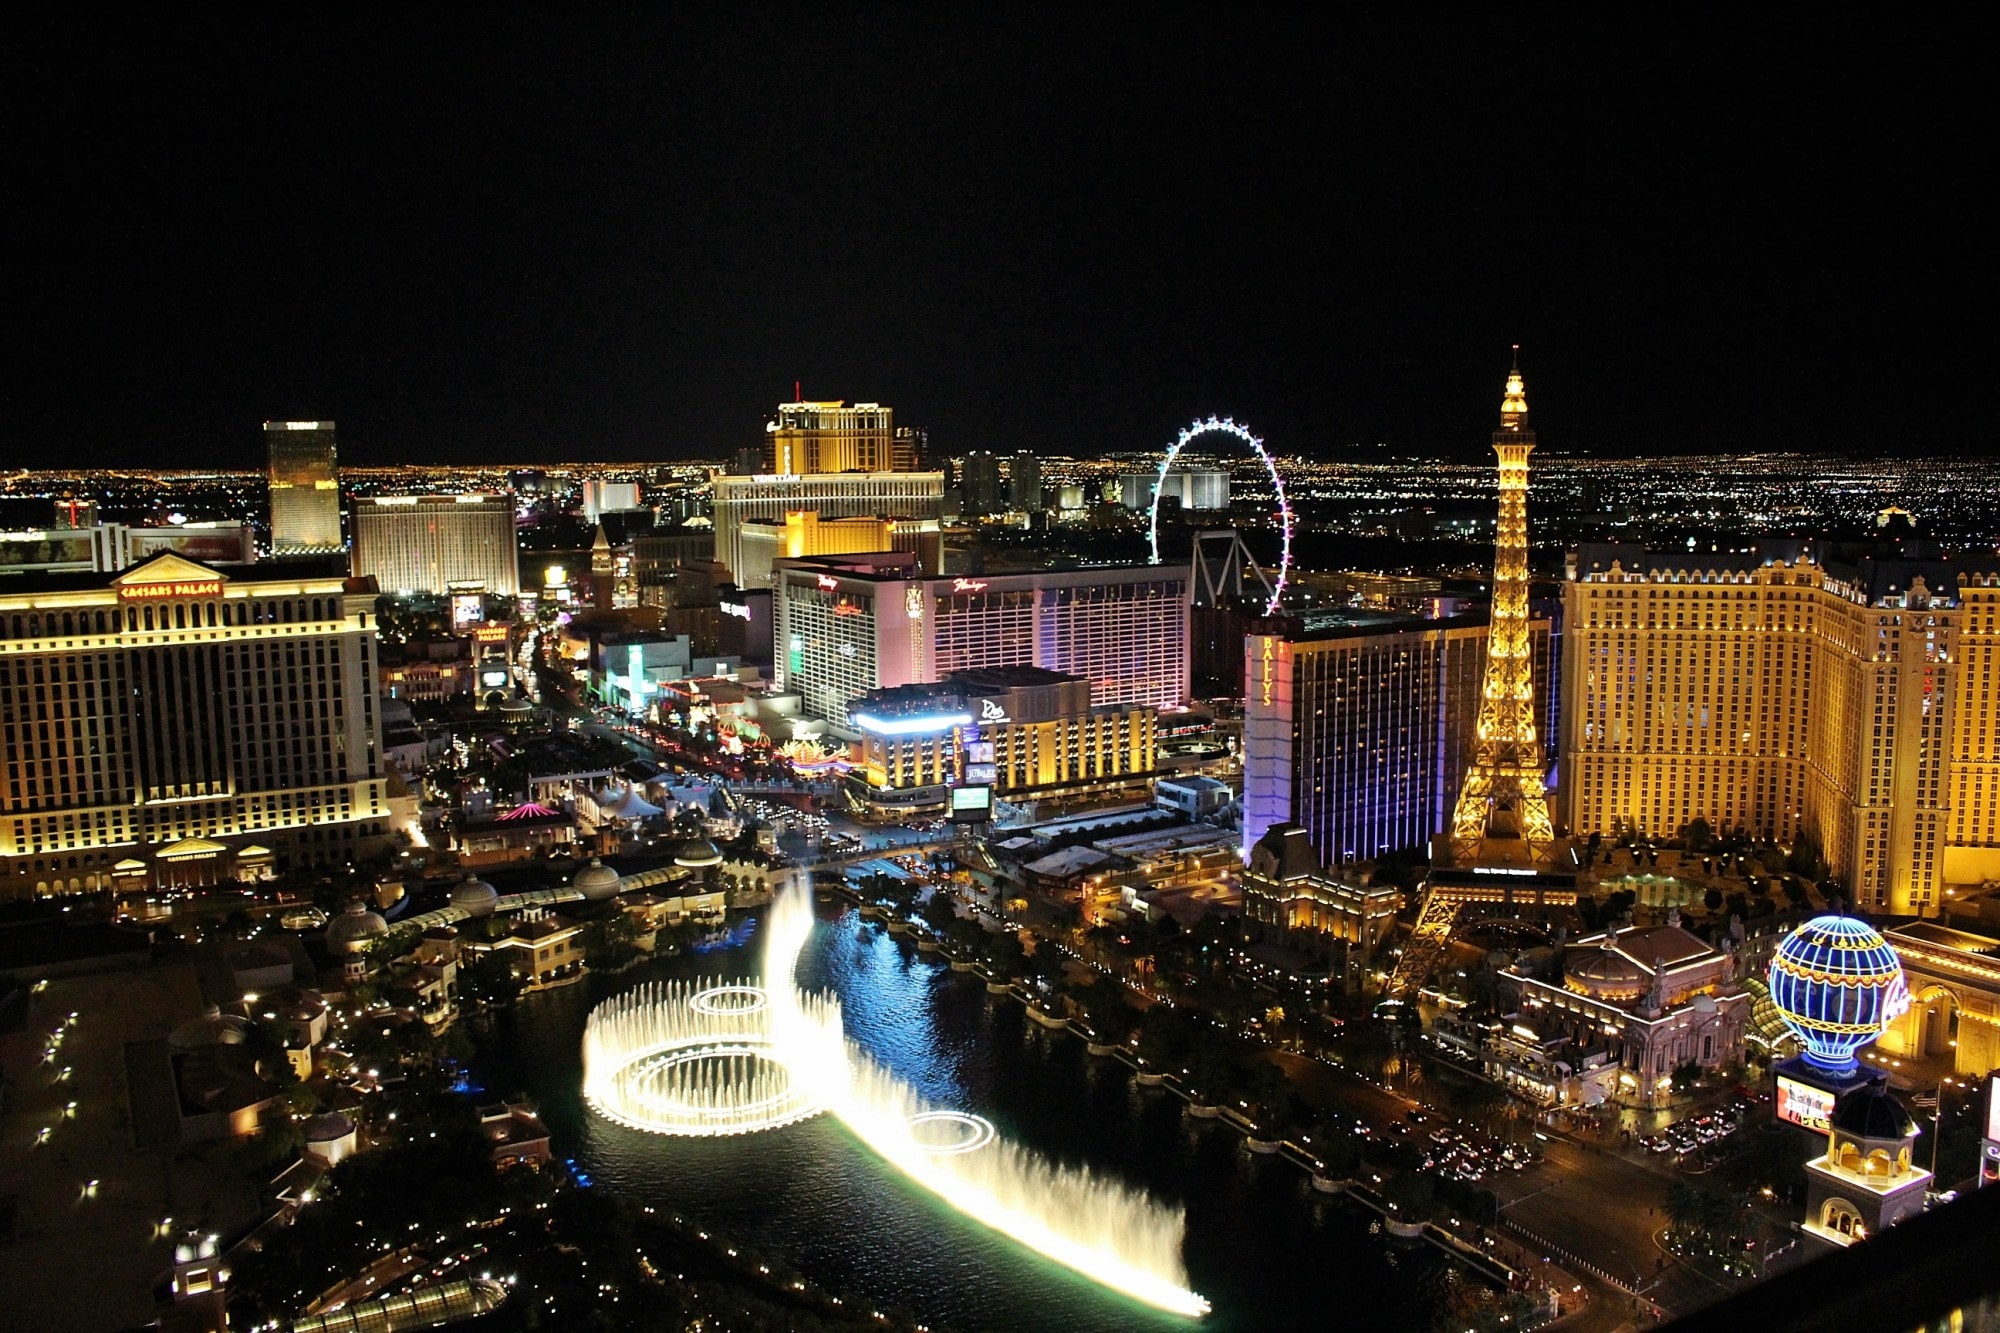 How To Find a Reputable Las Vegas Property Management Company